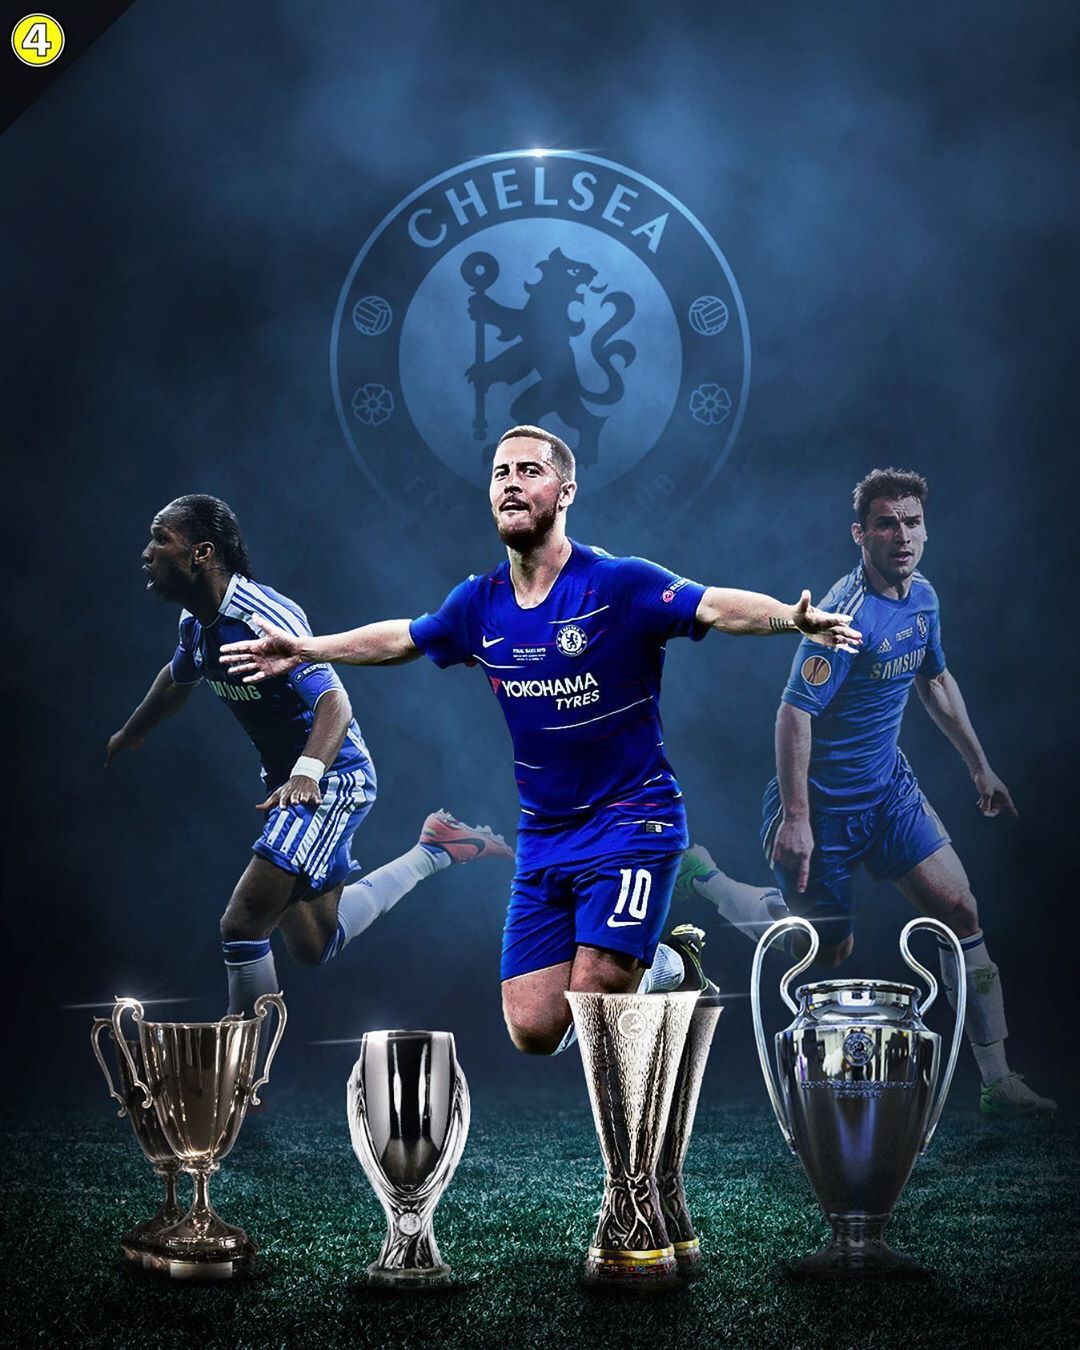 Chelsea in Europe: A moderately Beautiful Story